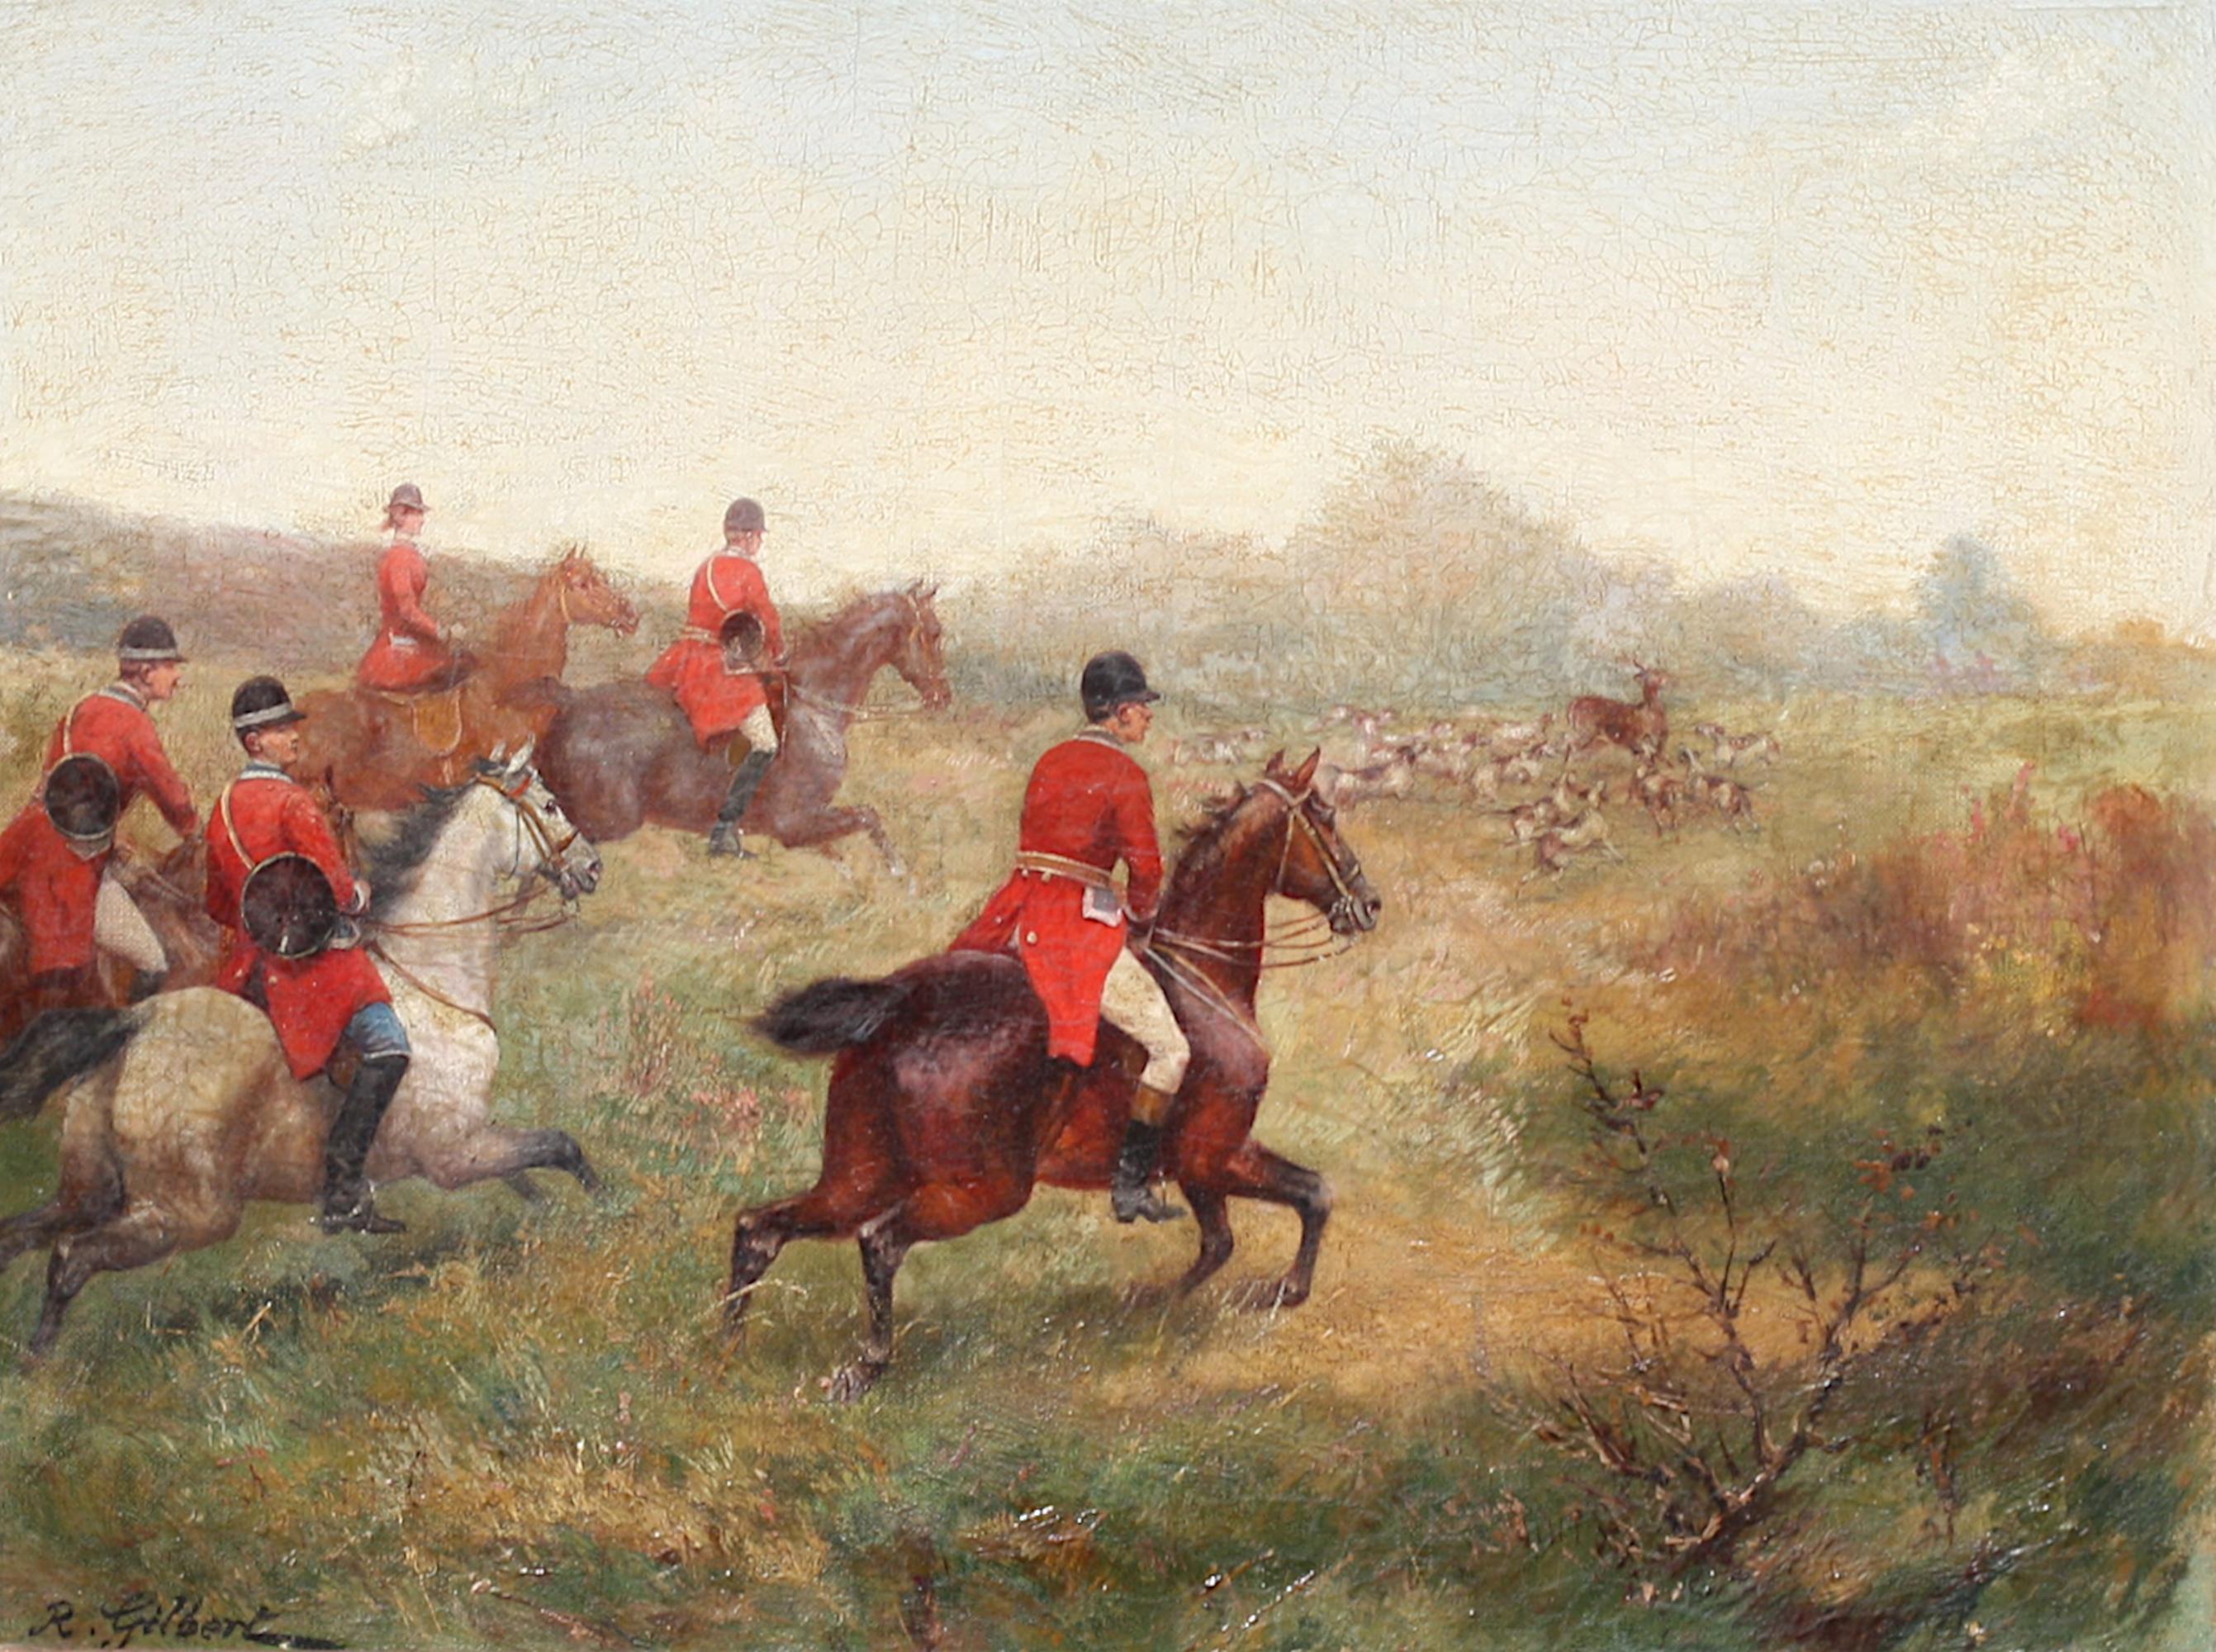 
R. Gilbert, (British, 19th/20th Century), Sporting Hunt Scene 
signed, oil on canvas, 
11.5 by 15.5 in. (29.21 by 39.37 cm.), overall, in a gilt frame 17 by 21 in. (43.18 by 53.34 cm.)
Provenance: Spencer Gallery, Palm Beach, FL.